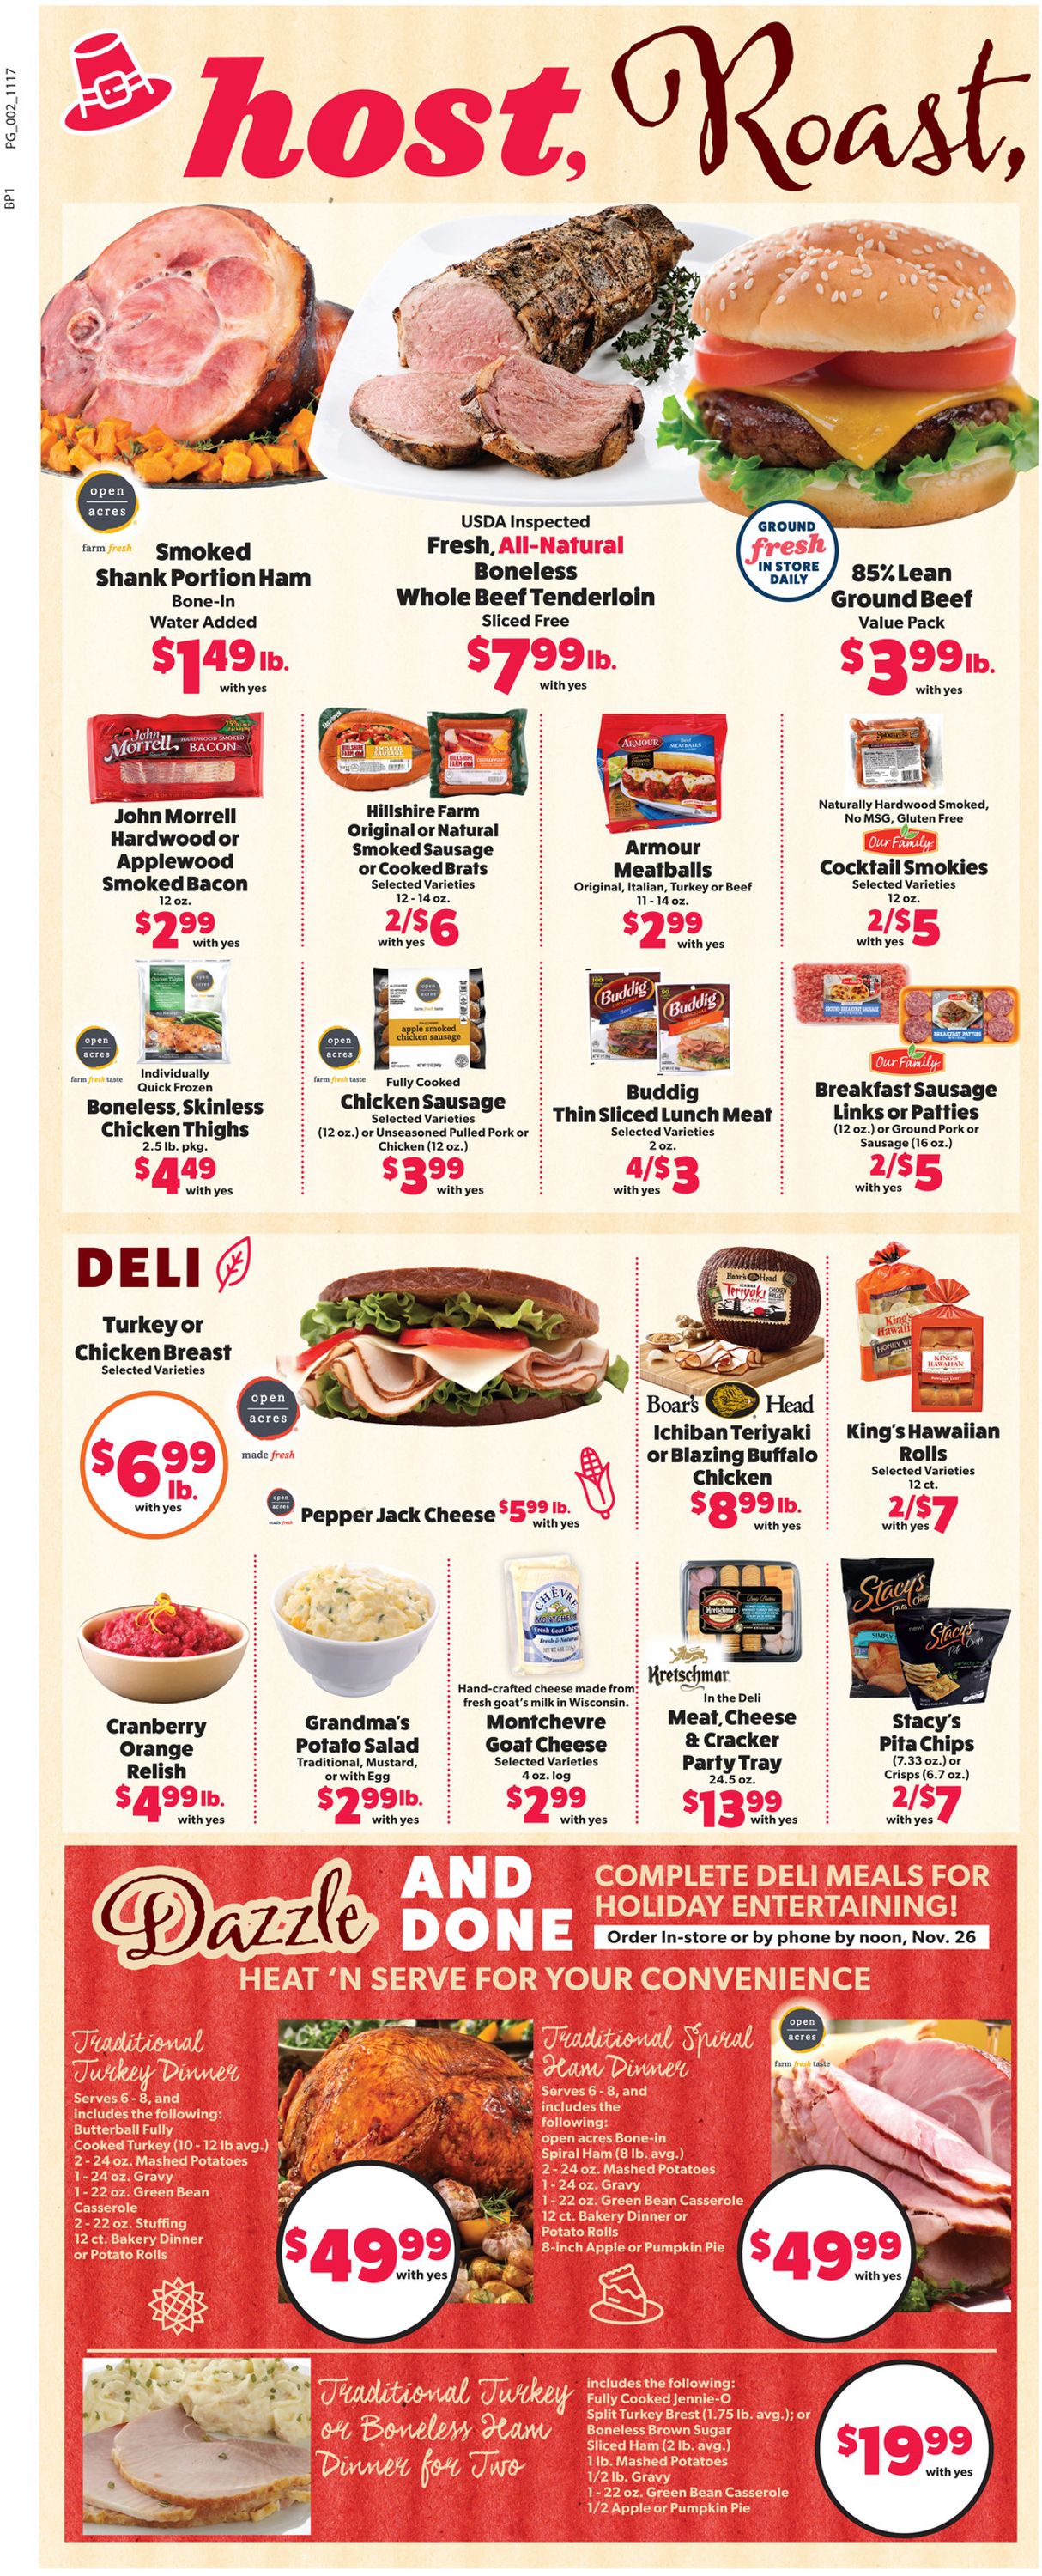 Catalogue Family Fare -  Thanksgiving Ad 2019 from 11/17/2019